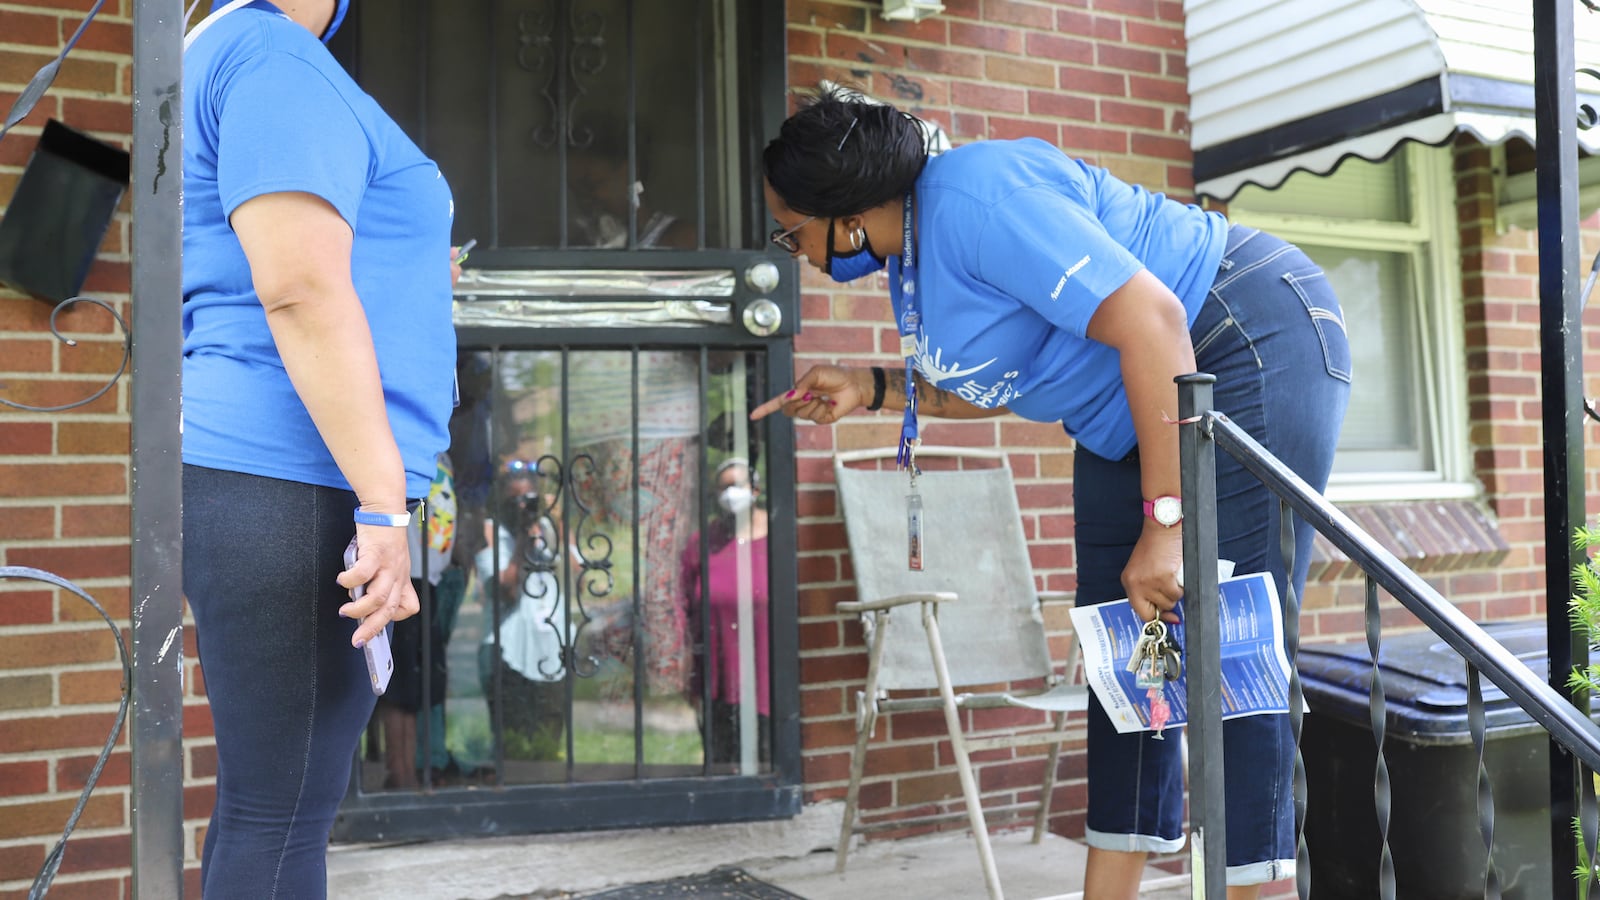 Two women wearing blue T-shirts and jeans stand on the front porch of a home and speak with a person through a glass door.